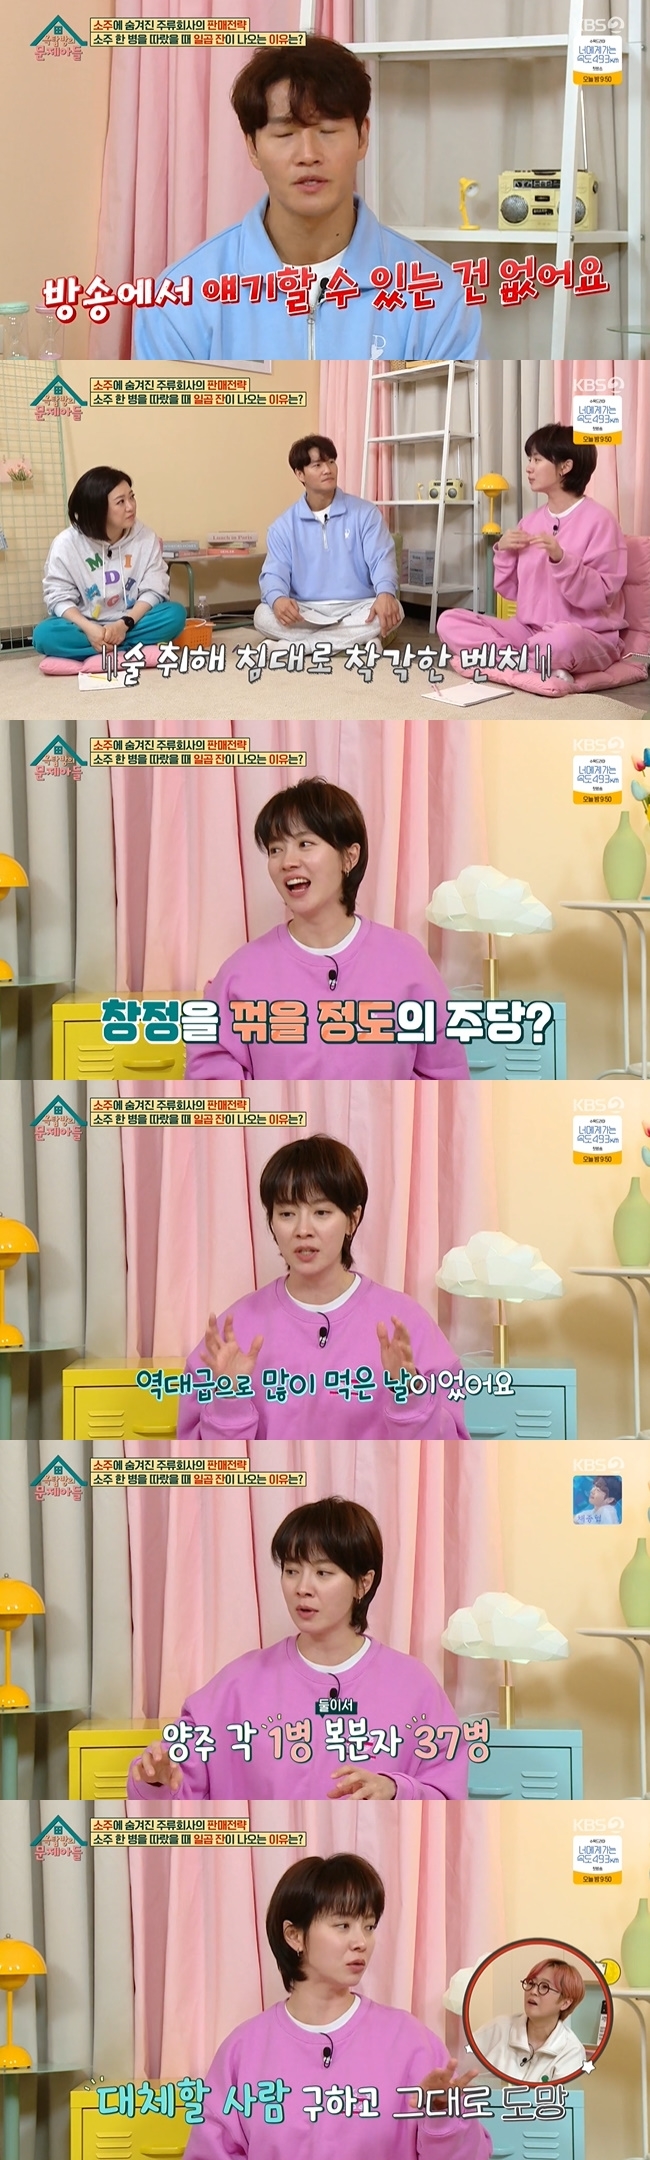 Song Ji-hyo has unveiled an extraordinary amount of alcohol.Actor Song Ji-hyo appeared as a guest on KBS 2TV The Trouble Son of the Rooftop broadcast on April 20.On the day of the broadcast, the sales strategy of the liquor company, which made seven bottles of shochu, came out as a problem.When Song Ji-hyos injection story came out, Kim Jong-guk said, There is nothing I can talk about on the air, I will only talk about sleeping.Theres a flower bed in our apartment, where I thought the bench was a bed, and I had slept on the bench with my shoes off, Song Ji-hyo explained.Song Eun-i and Kim Sook asked about the story that Song Ji-hyo was the enough party to beat Im Chang-jung.Song Ji-hyo said, I had a drink with Im Chang-jung, but it was the day I ate a lot of alcohol that day. I ate 37 bottles of bokbunjaju in one bottle of Yangju.I ate like crazy, but it was so hard. I saved someone to replace me and ran away, he said.